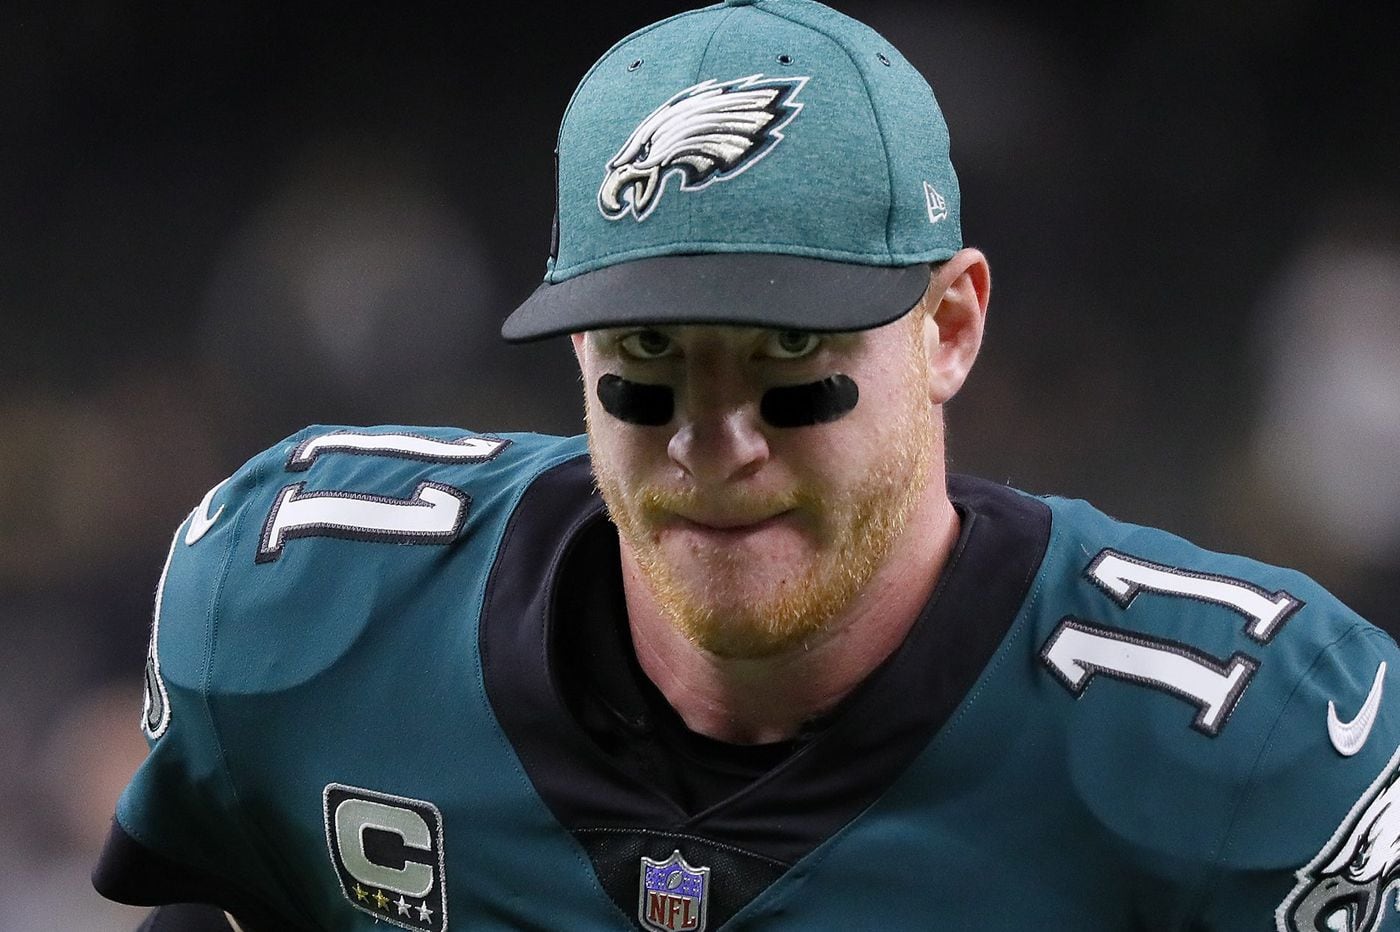 Eagles quarterback Carson Wentz reflects on challenging year, recent